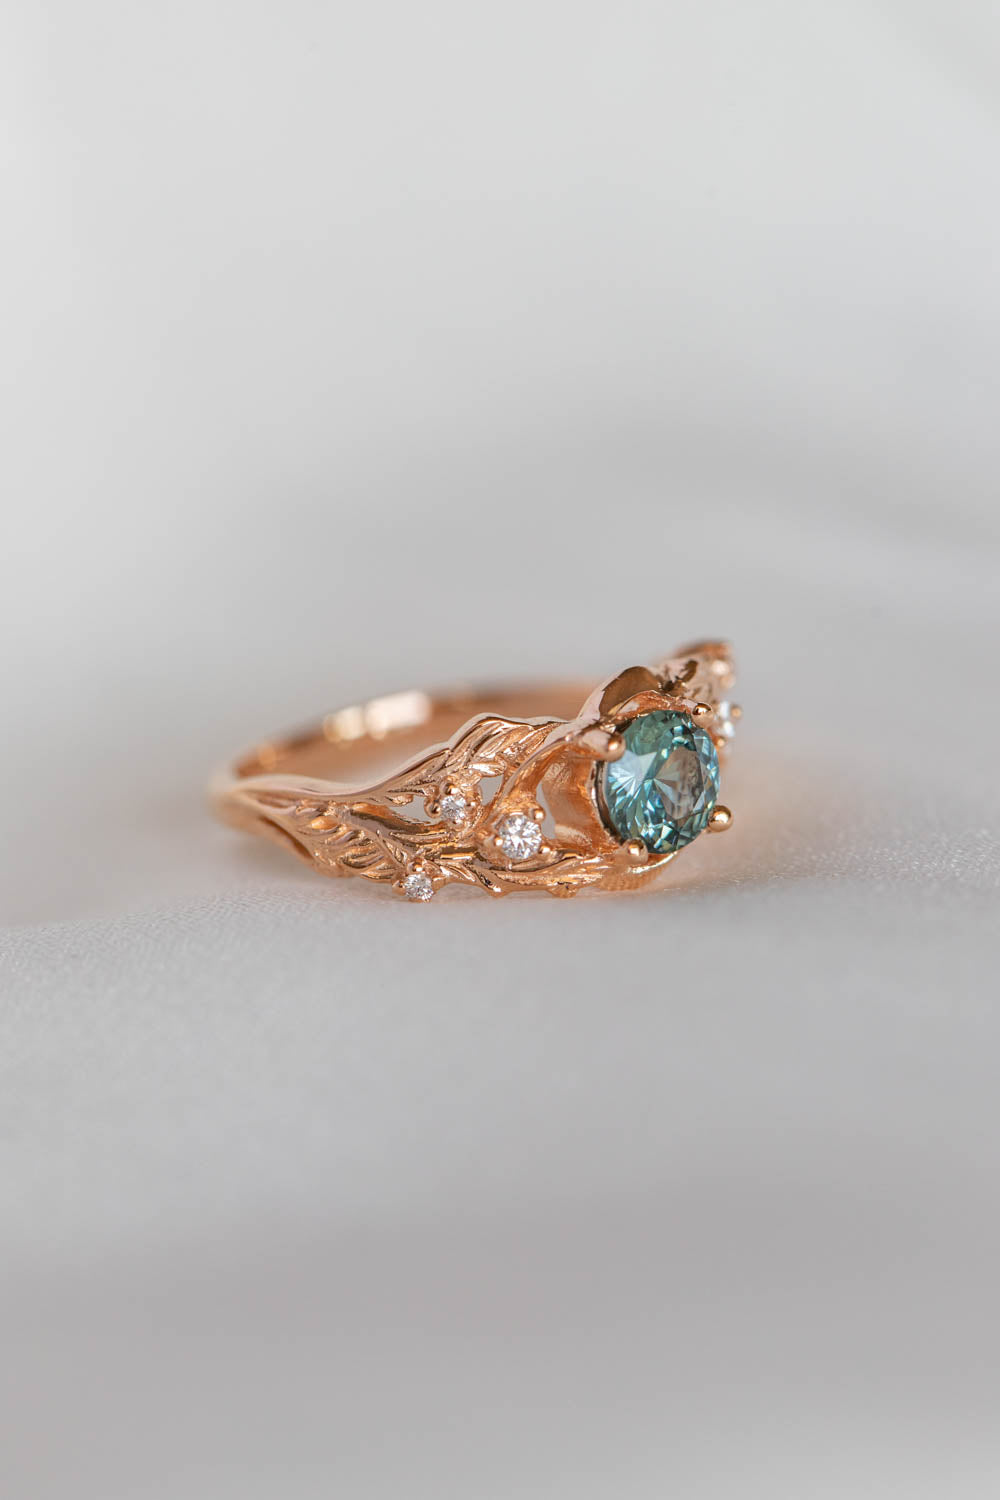 Genuine teal sapphire engagement ring, leaf and diamonds promise ring / Japanese Maple - Eden Garden Jewelry™